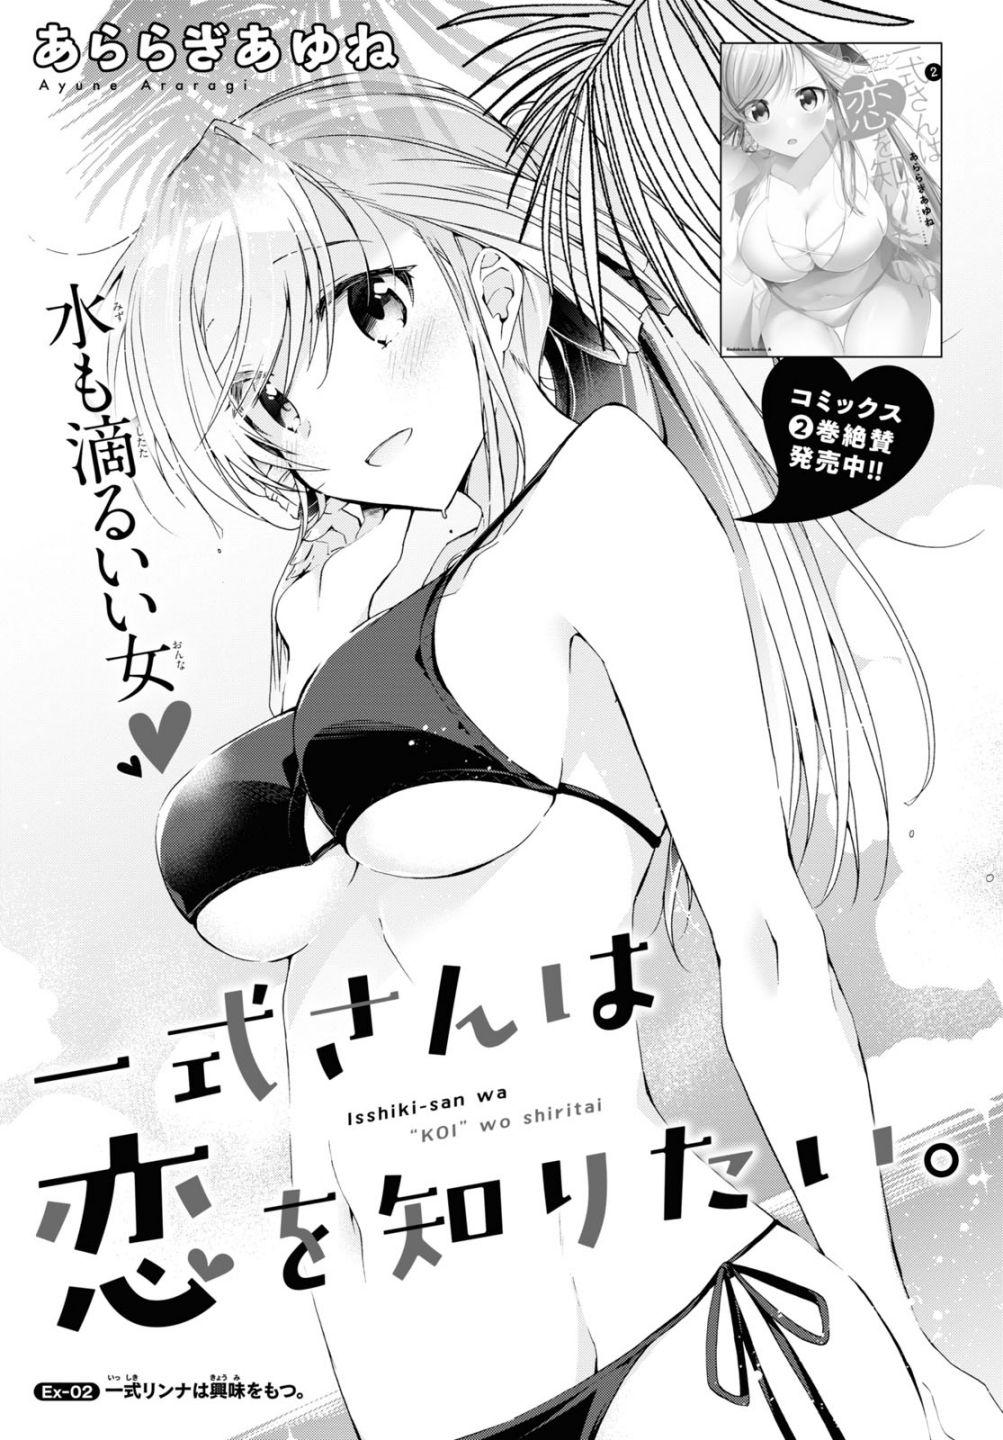 Isshiki-san Wants to Know About Love. - chapter 12.5 - #1